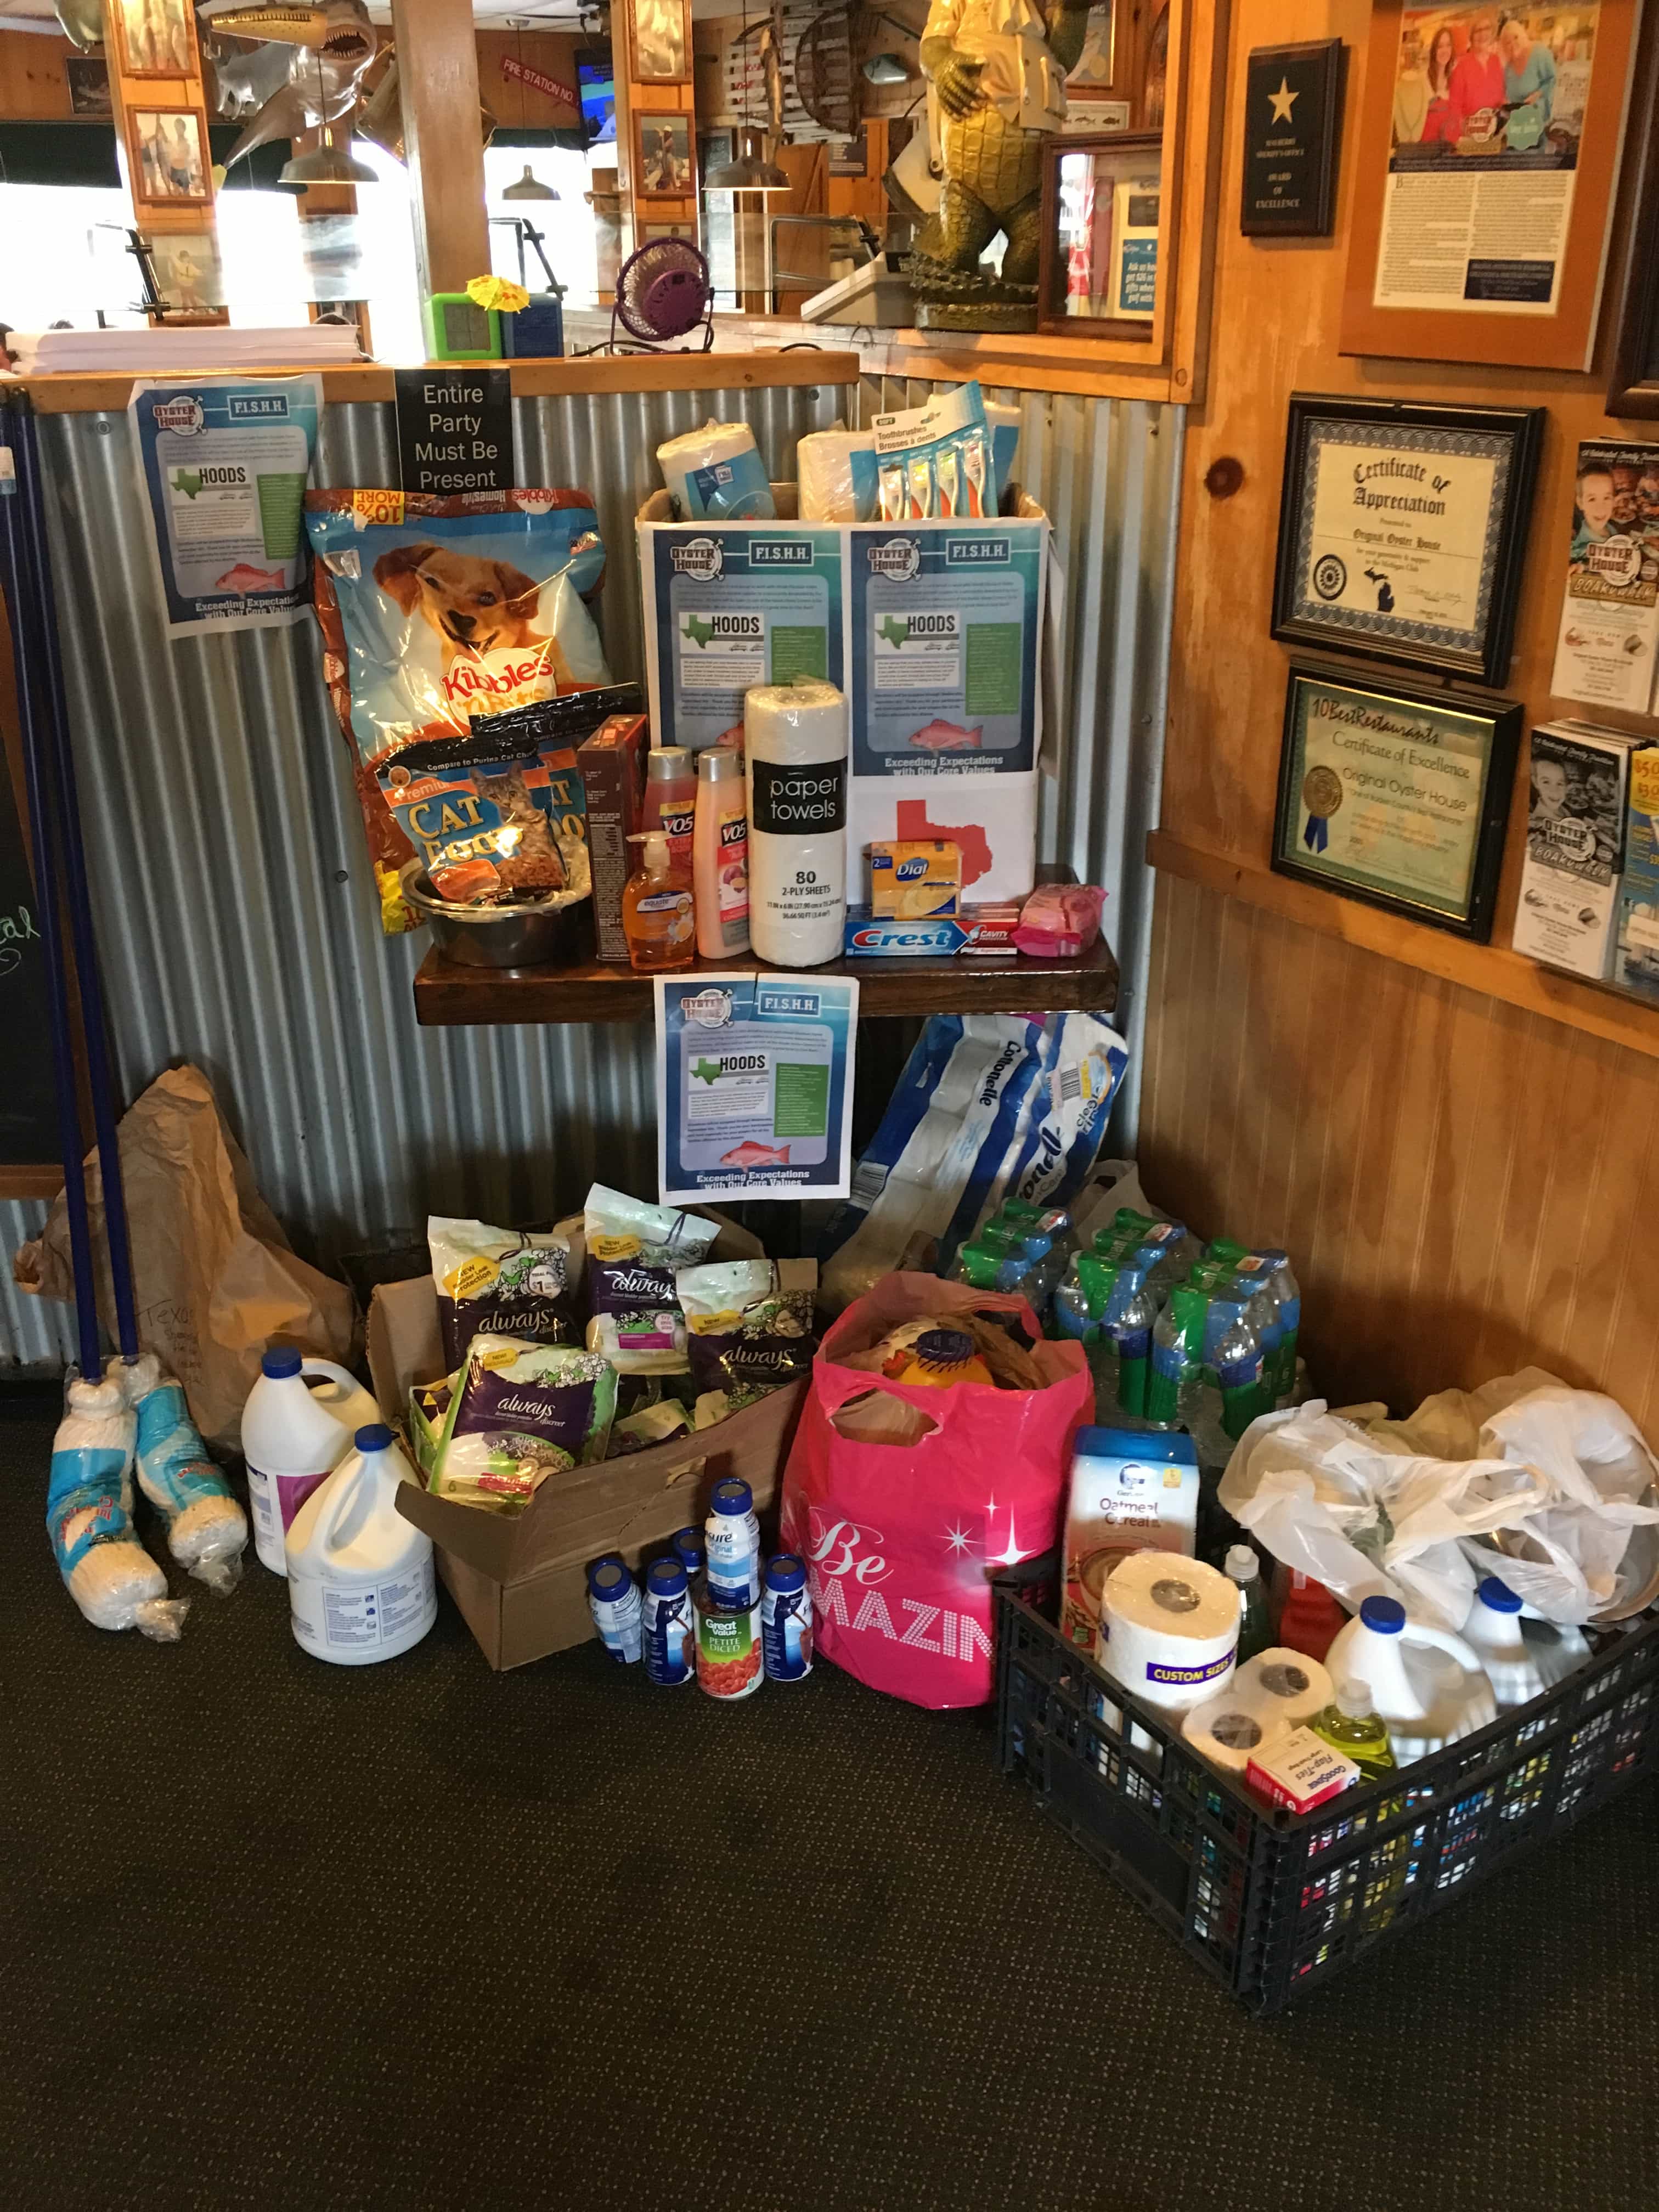 The donations collected by the Original Oyster House